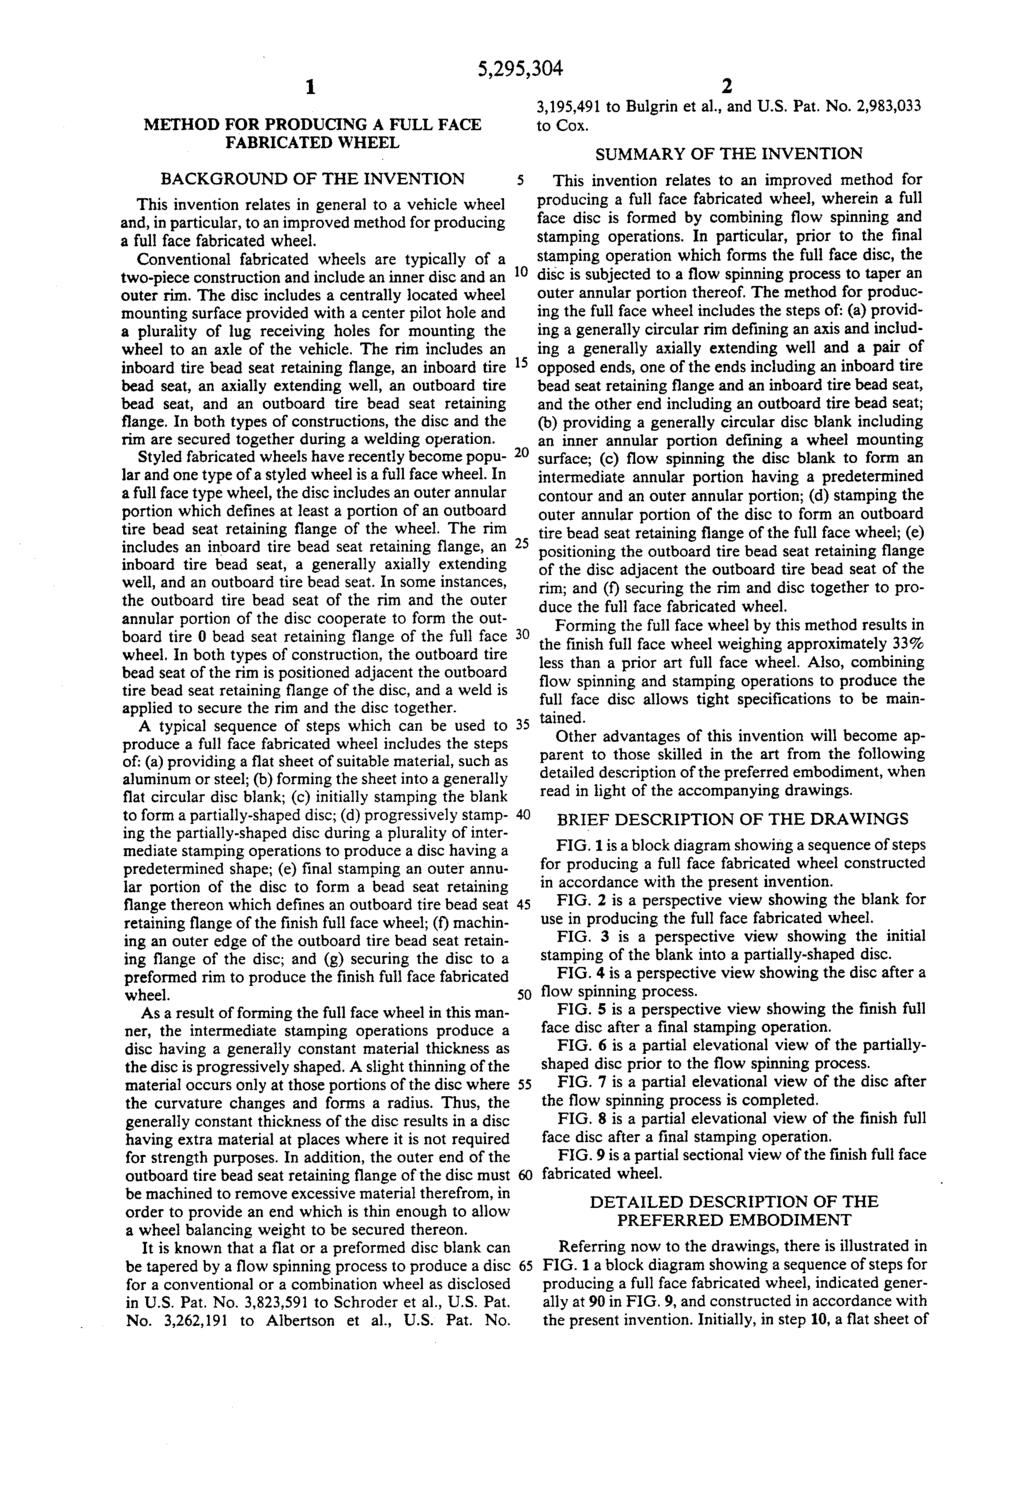 1. METHOD FOR PRODUCING A FULL FACE FABRICATED WHEEL BACKGROUND OF THE INVENTION This invention relates in general to a vehicle wheel and, in particular, to an improved method for producing a full